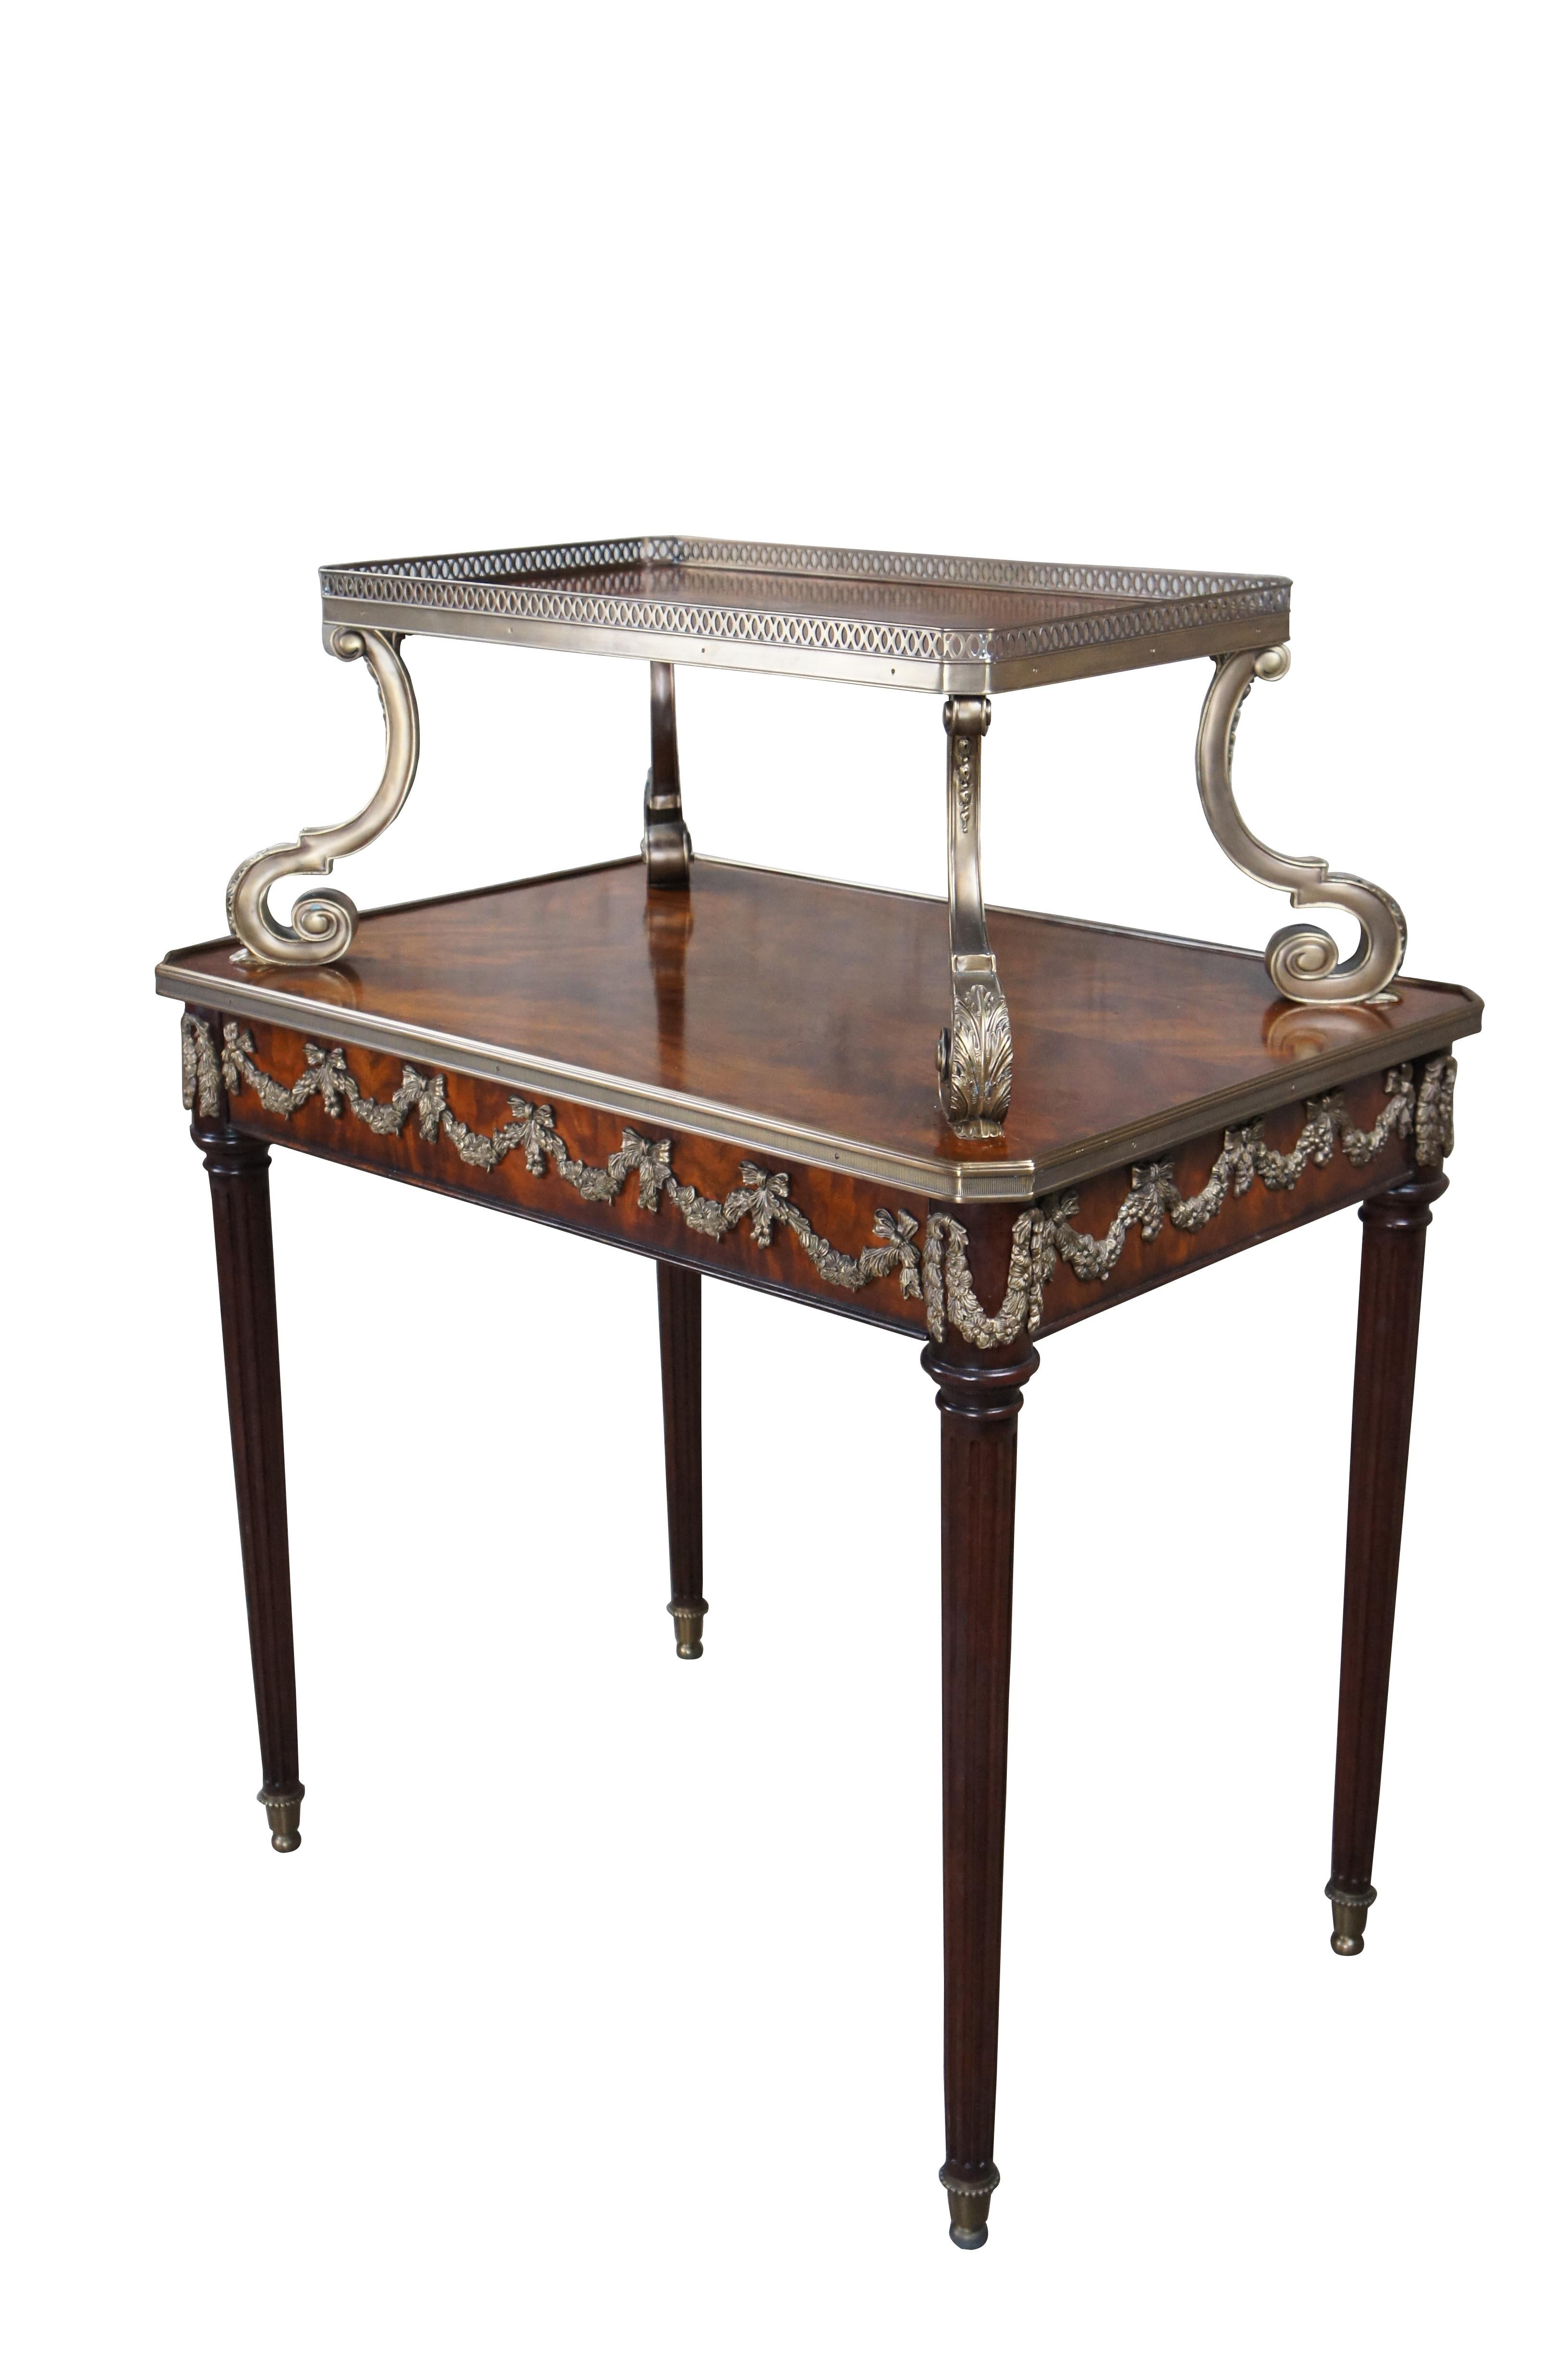 Late 20th century Louis XVI table by Theodore Alexander. Part of their Replica Collection. The original dating to 1780. A two tier crotch mahogany frame with drawer, the pierced brass galleried tier on leaf vast brass scroll supports trailing to the